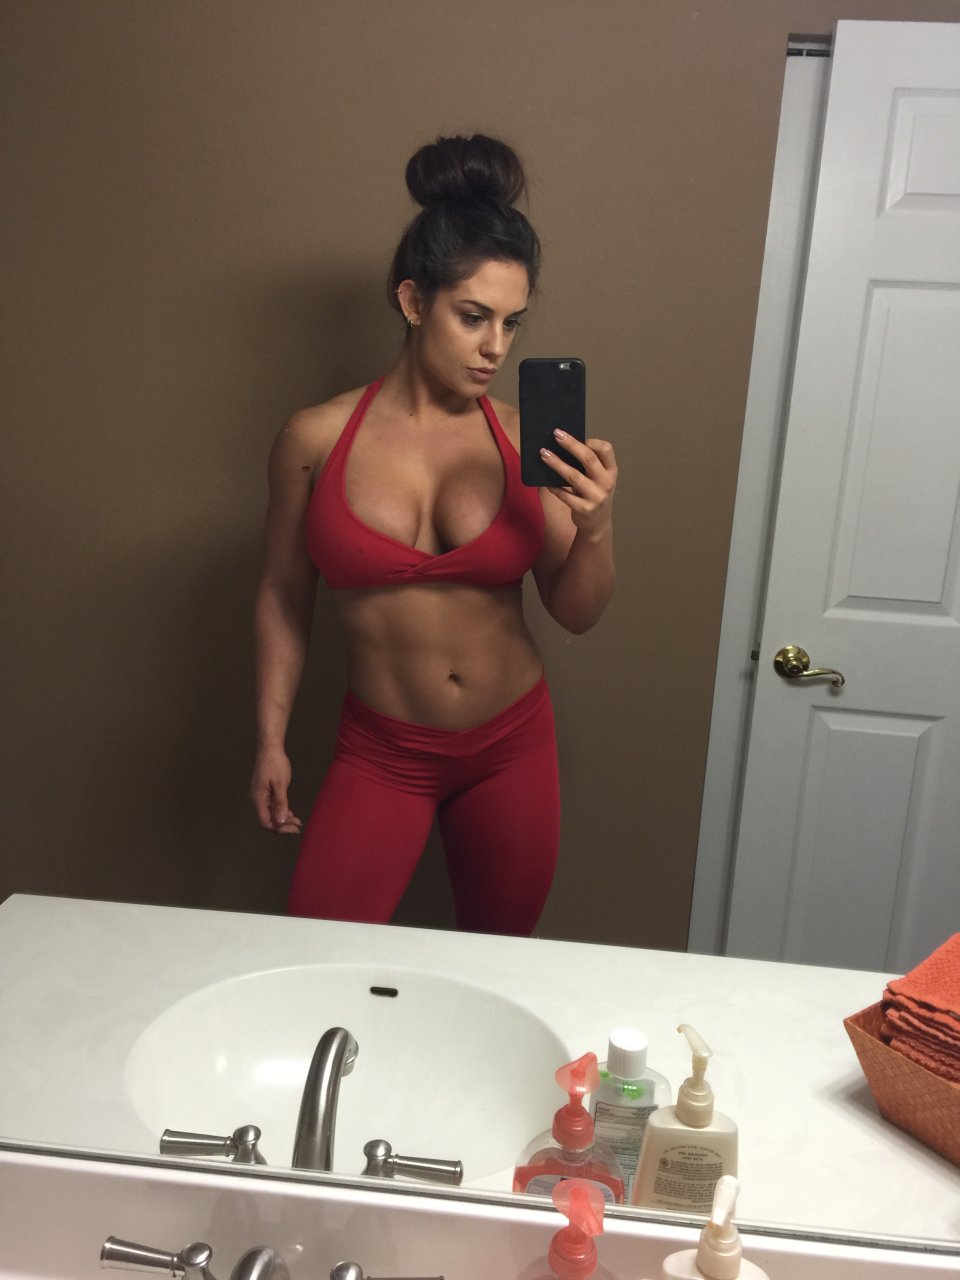 Kaitlyn WWE L
eaked TheFappening (New Photos)